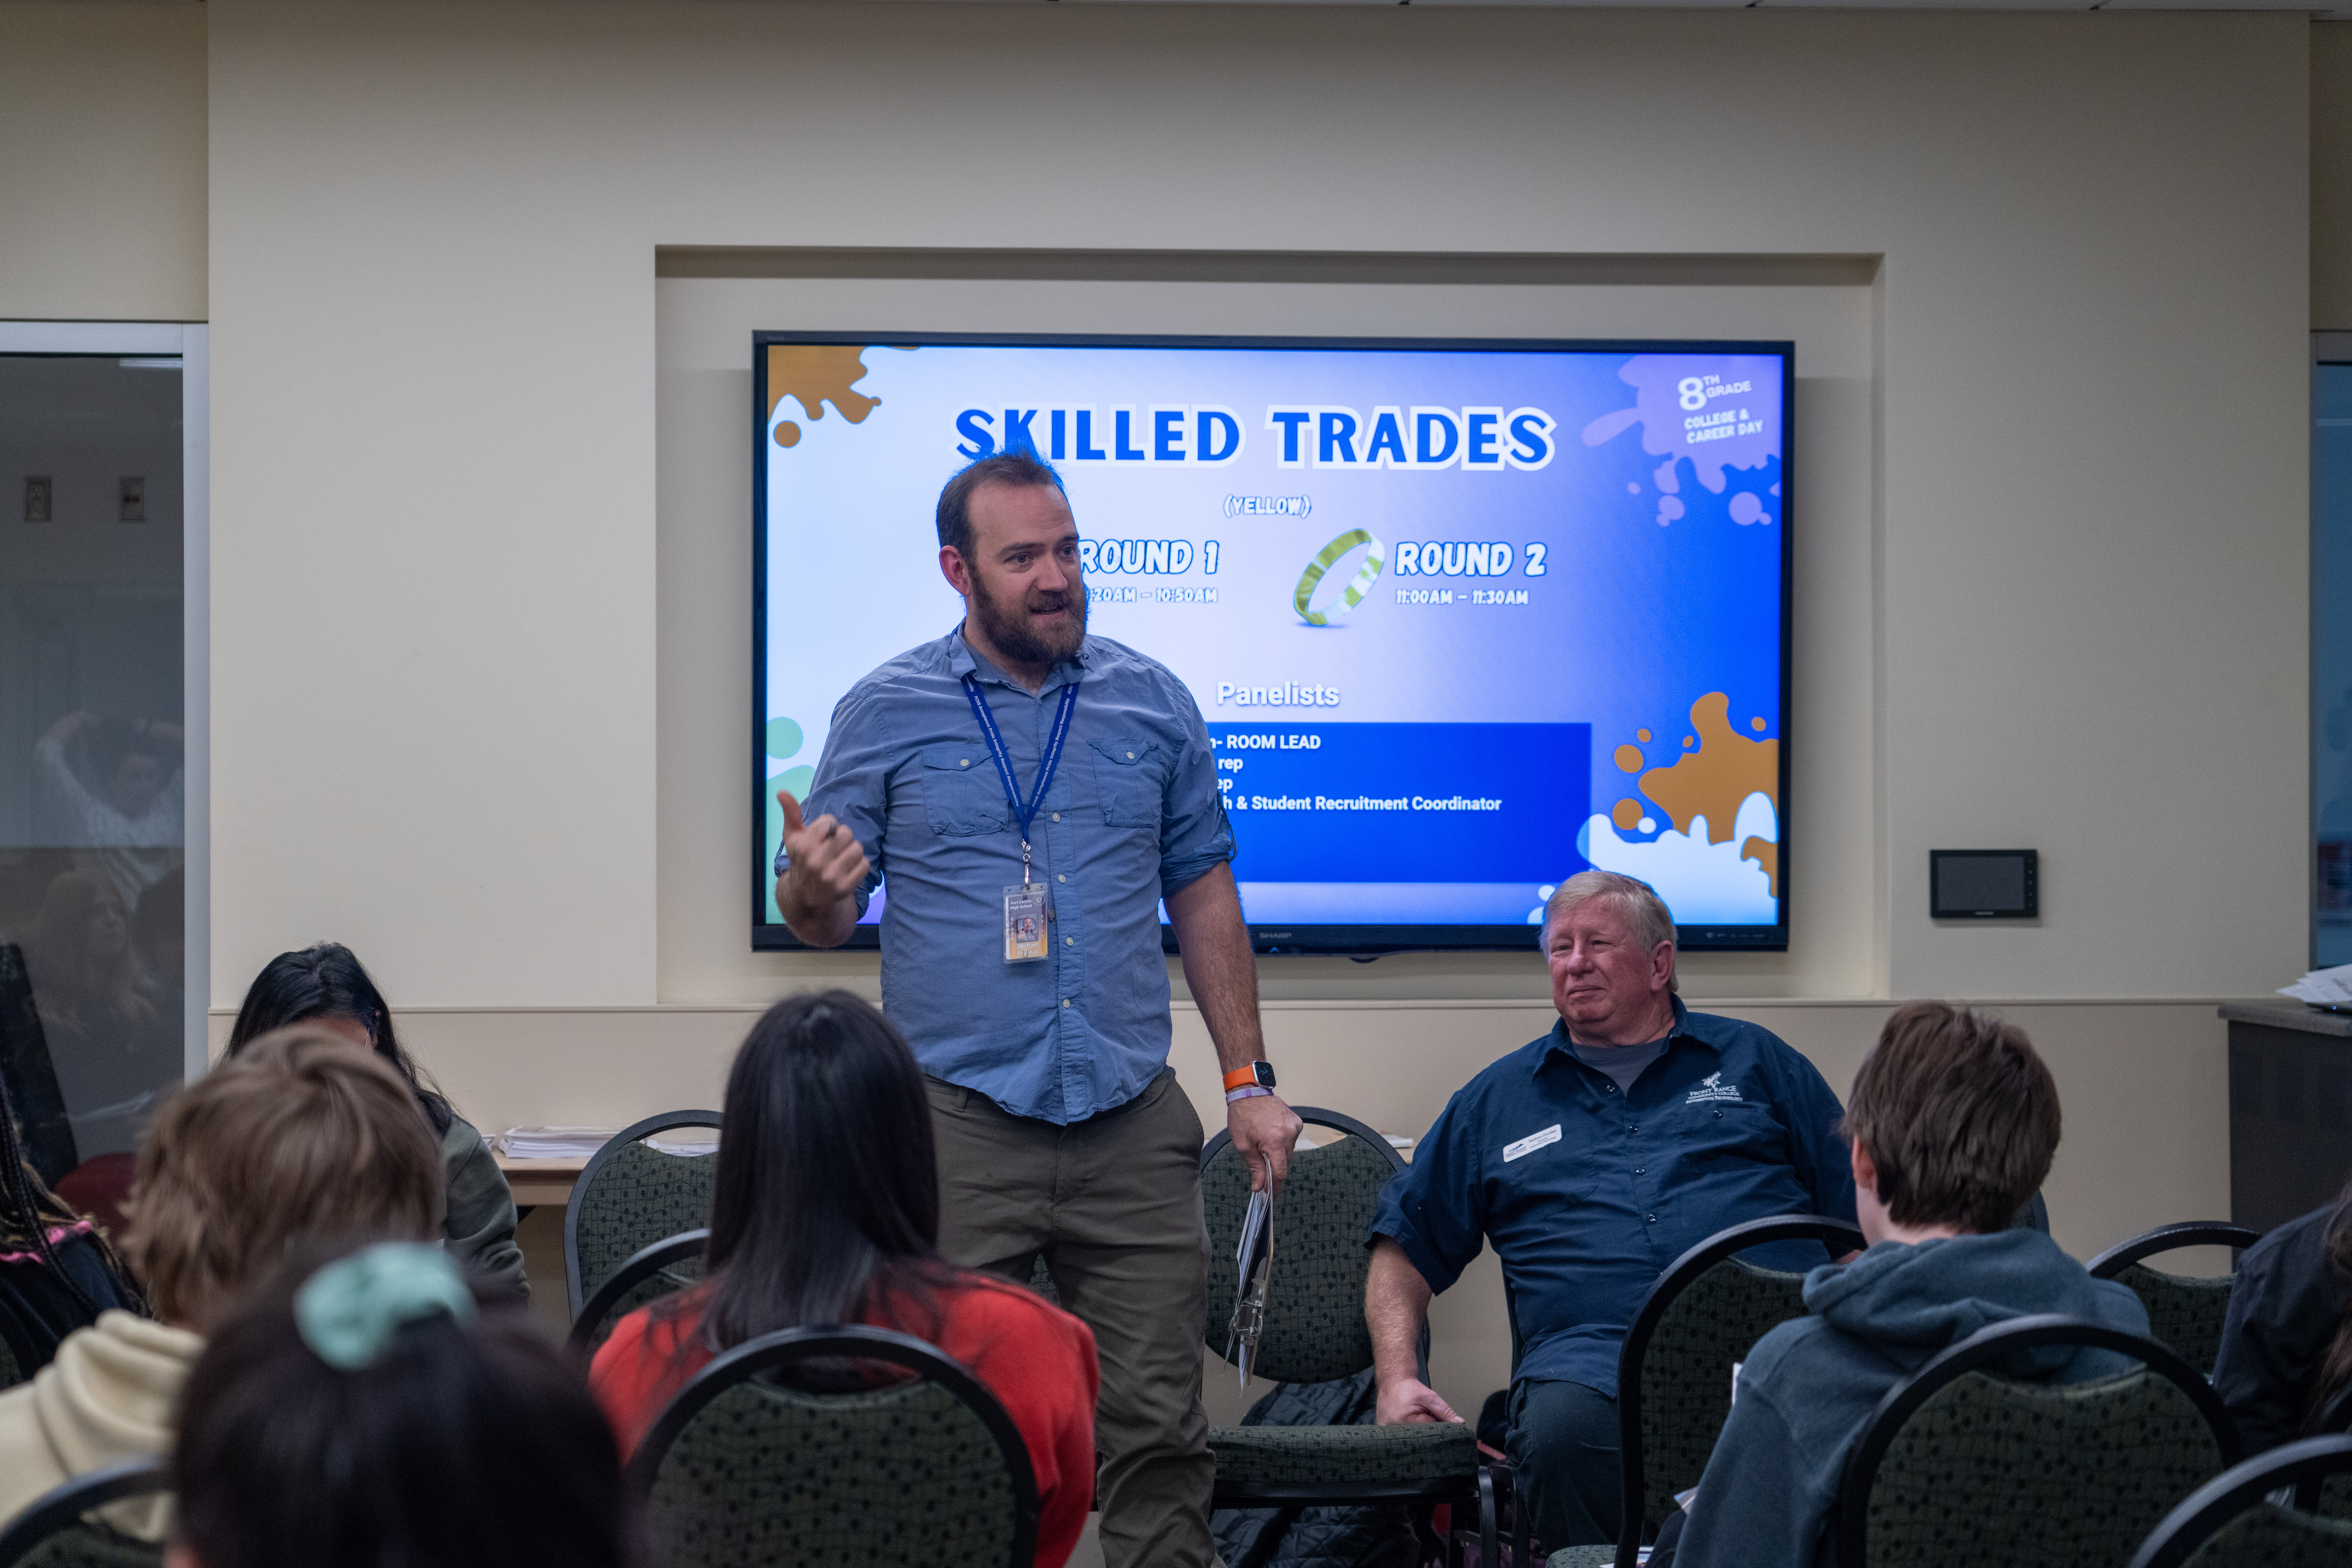 Students hear from a skilled trades professional during a Career Day at CSU.